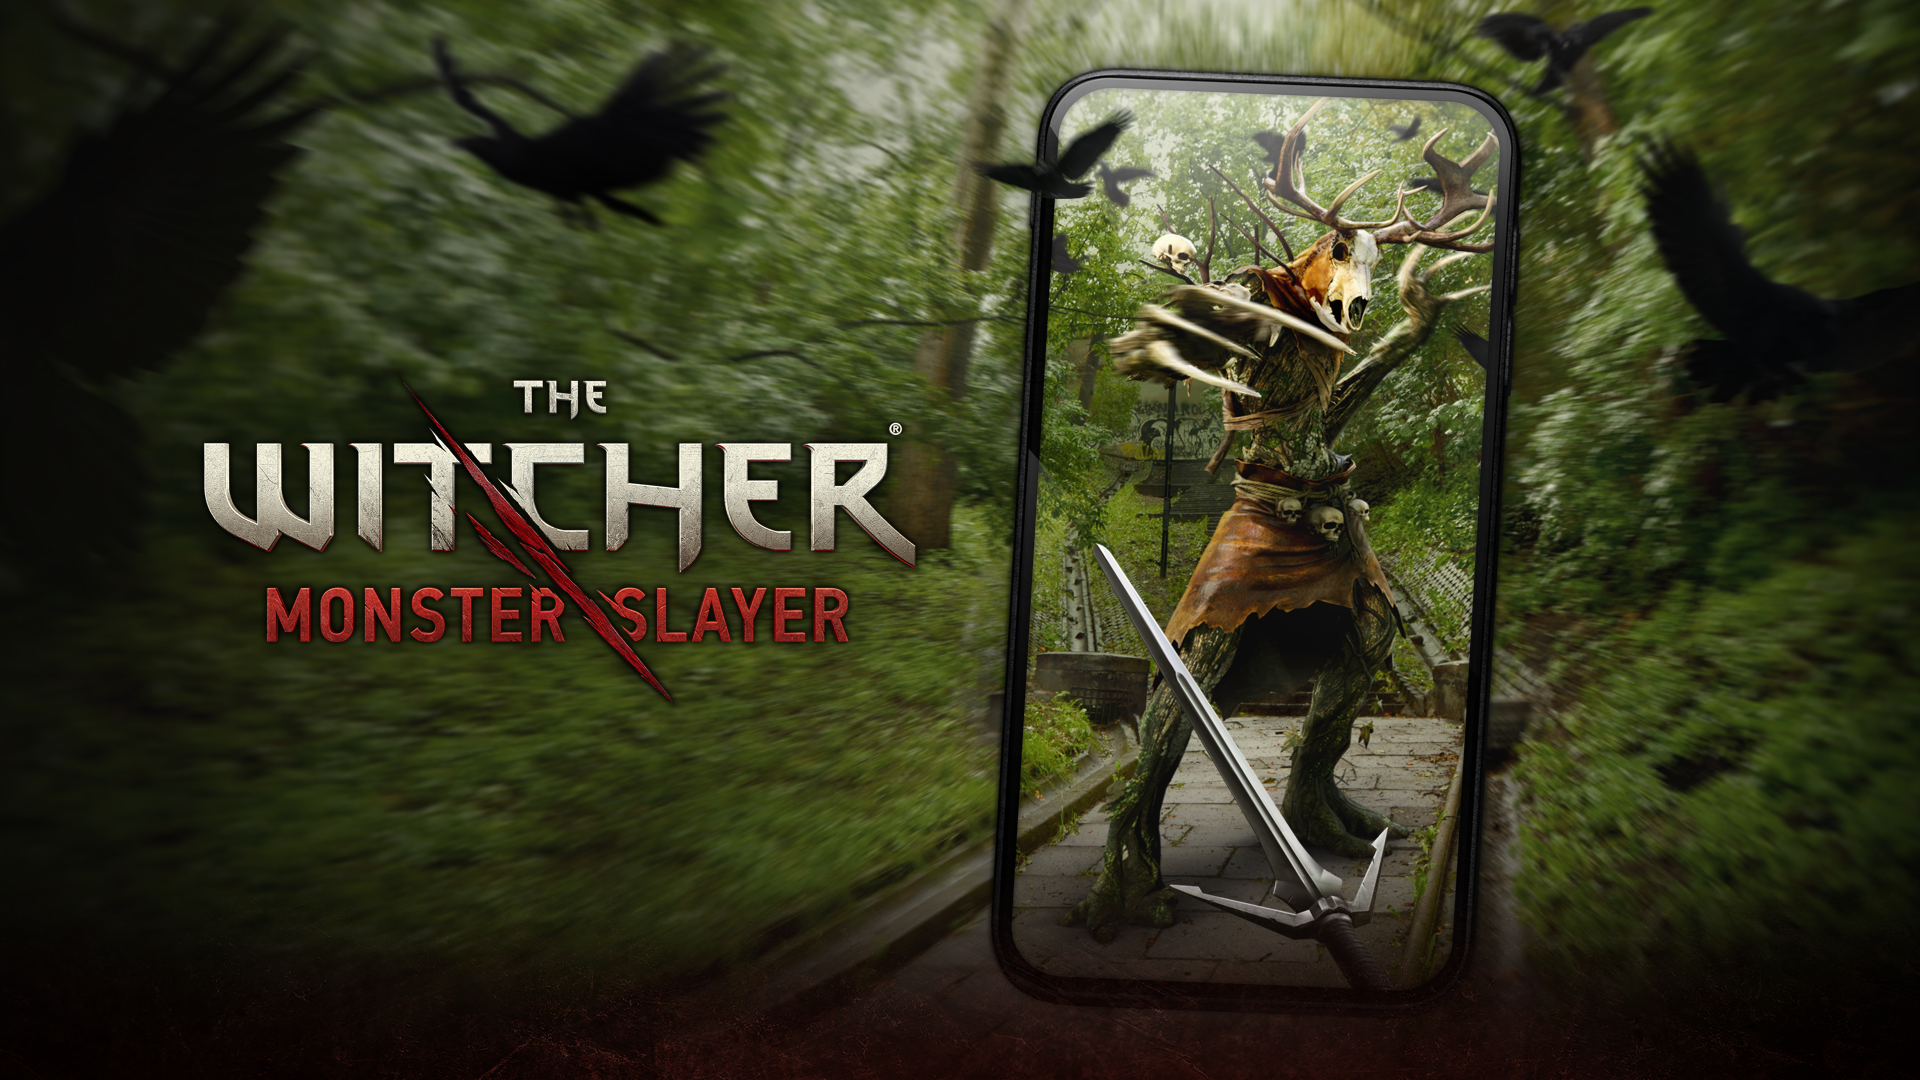 The Witcher: Monster Slayer Announced!